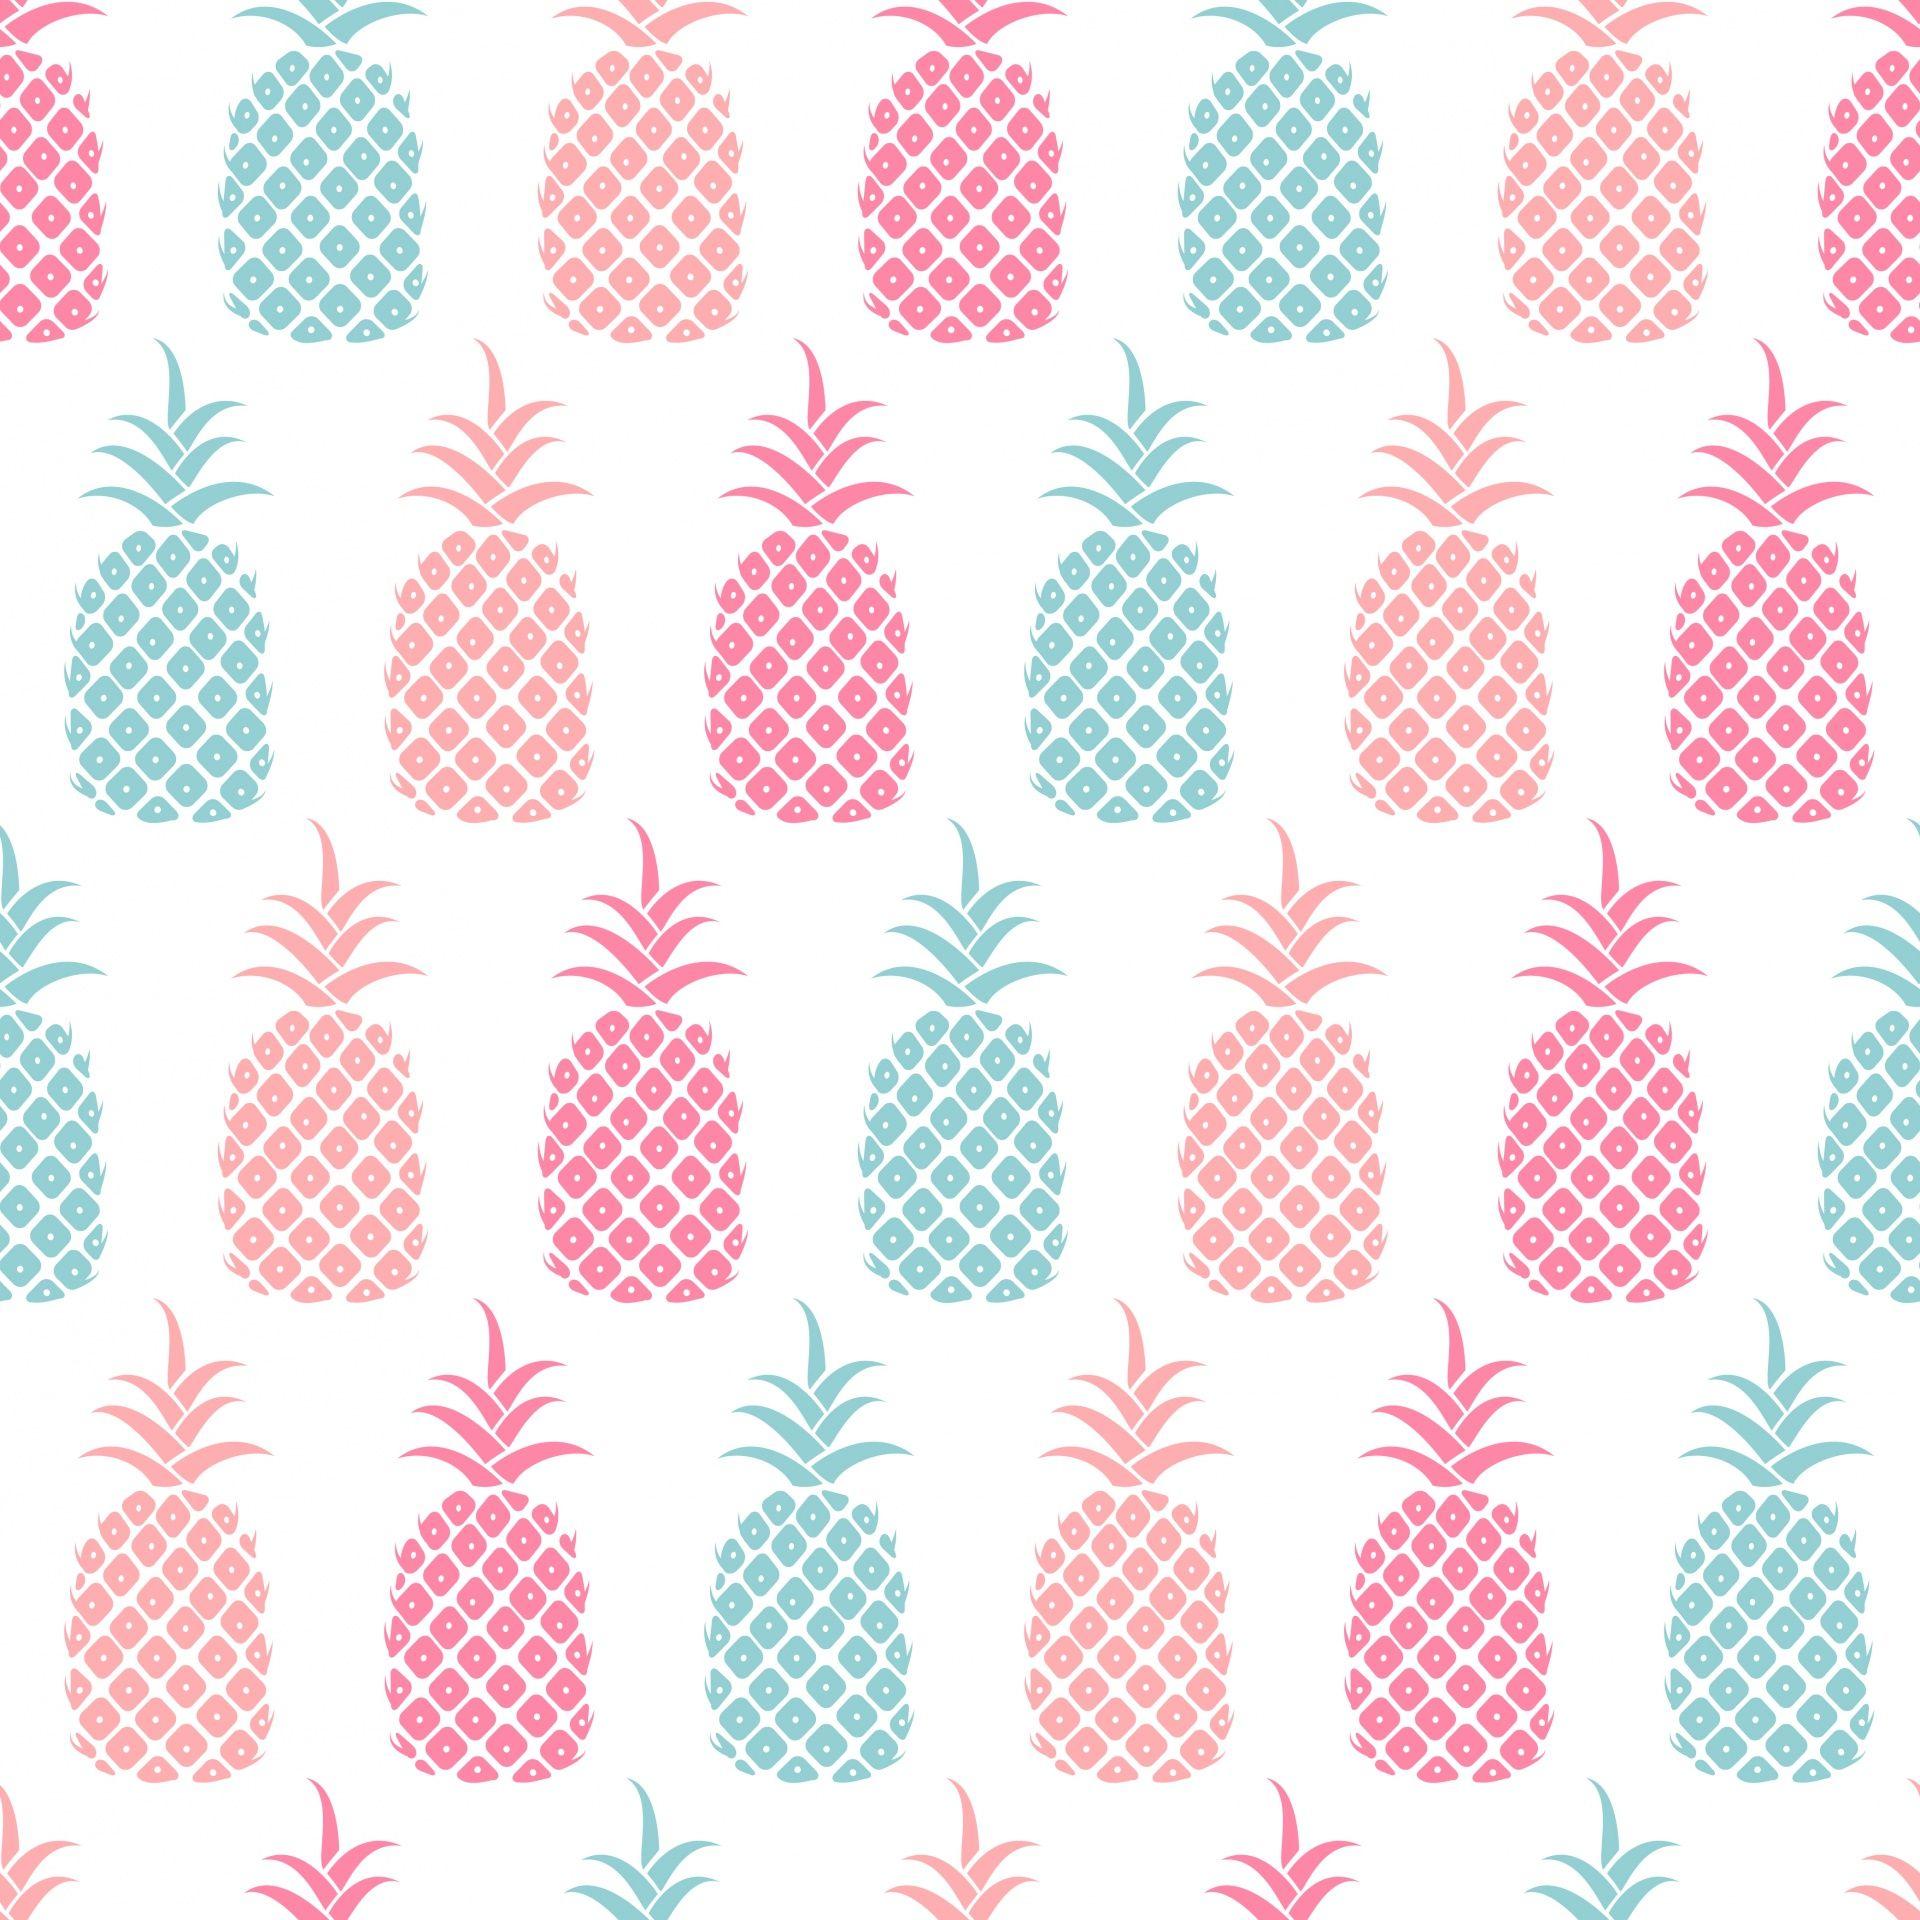 Pineapple Wallpaper Pattern Free Domain Picture